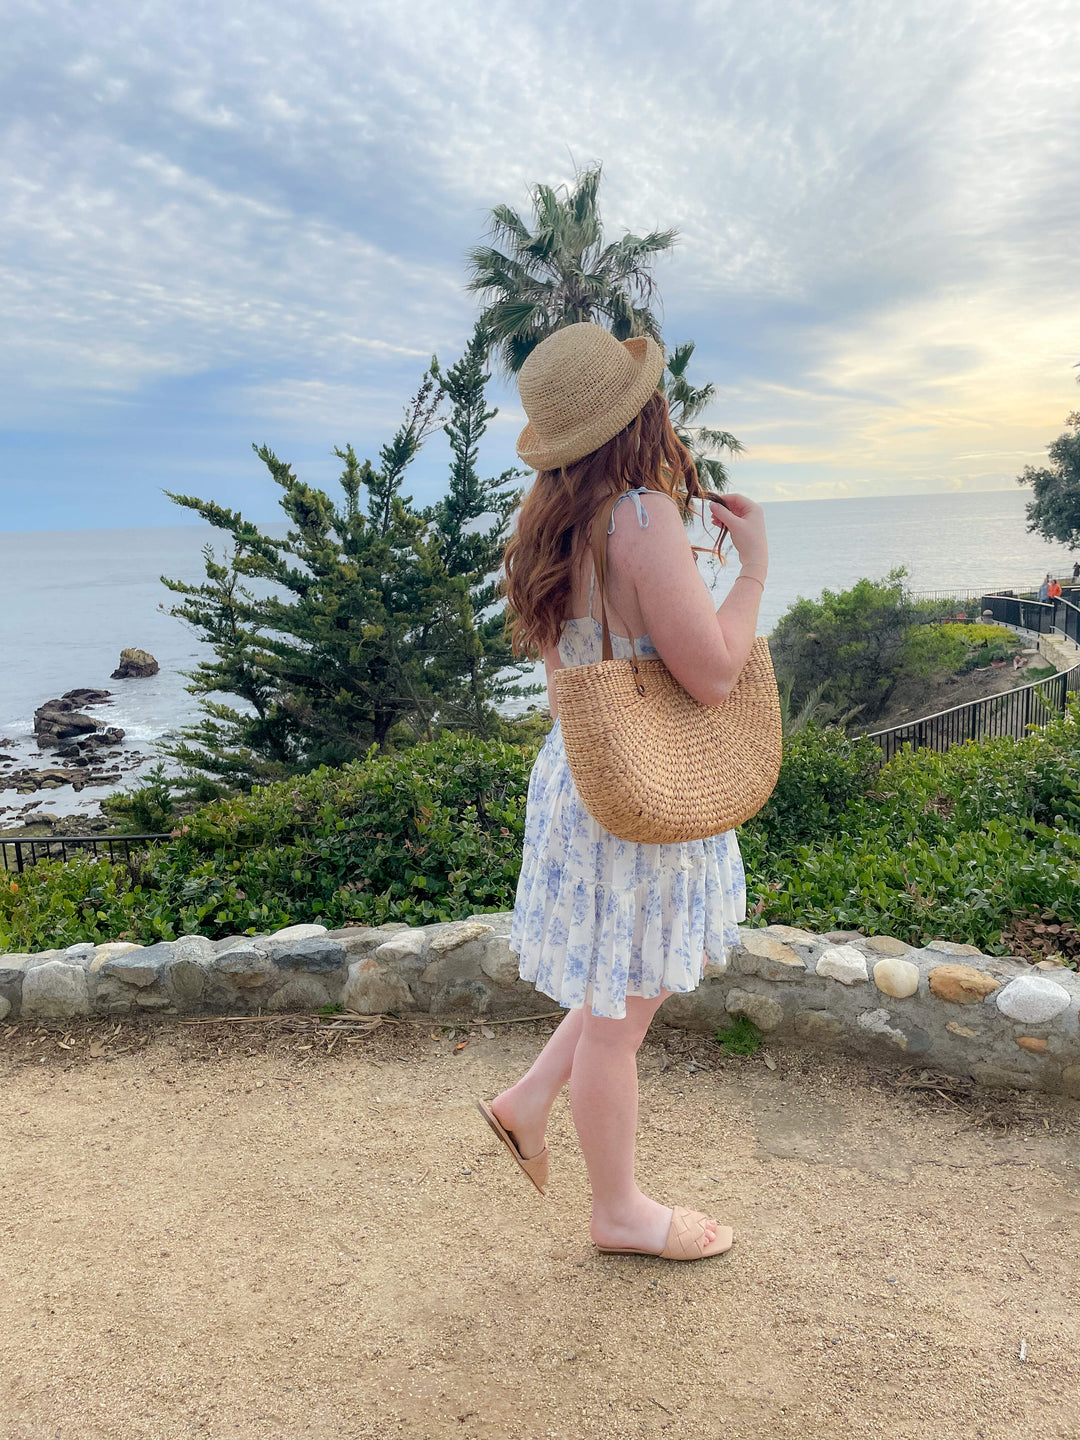 Girl at the beach carrying a grass purse with a leather strap